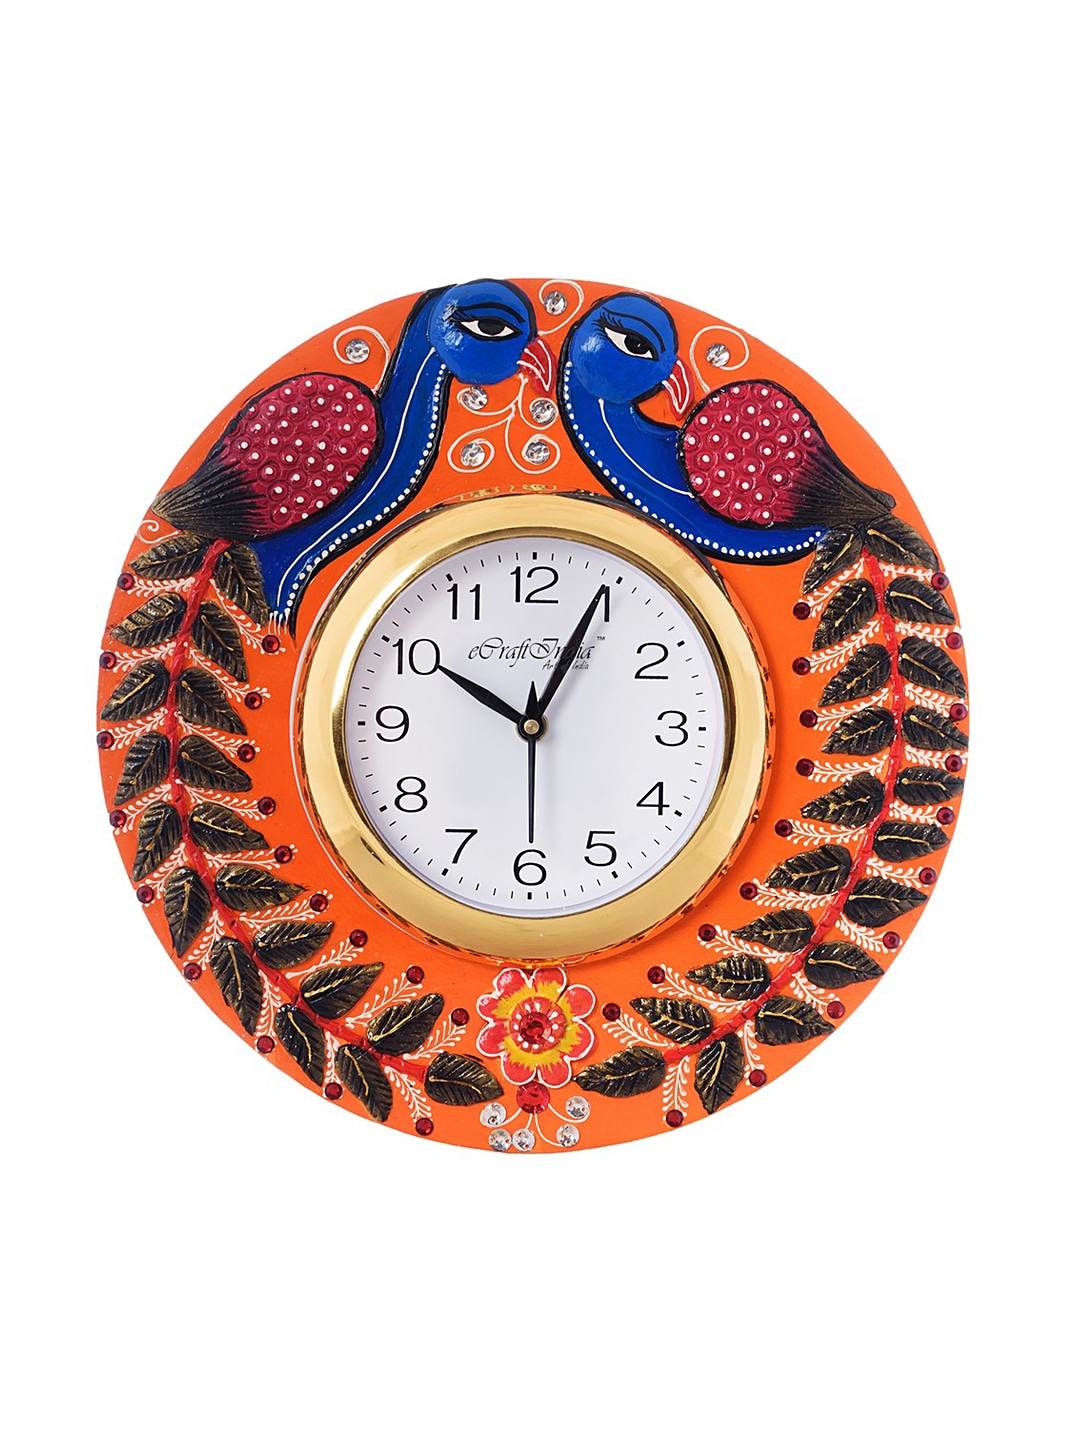 eCraftIndia White Dial Embossed Peacock-Shaped Handcrafted 30.48 cm Analogue Wall Clock Price in India